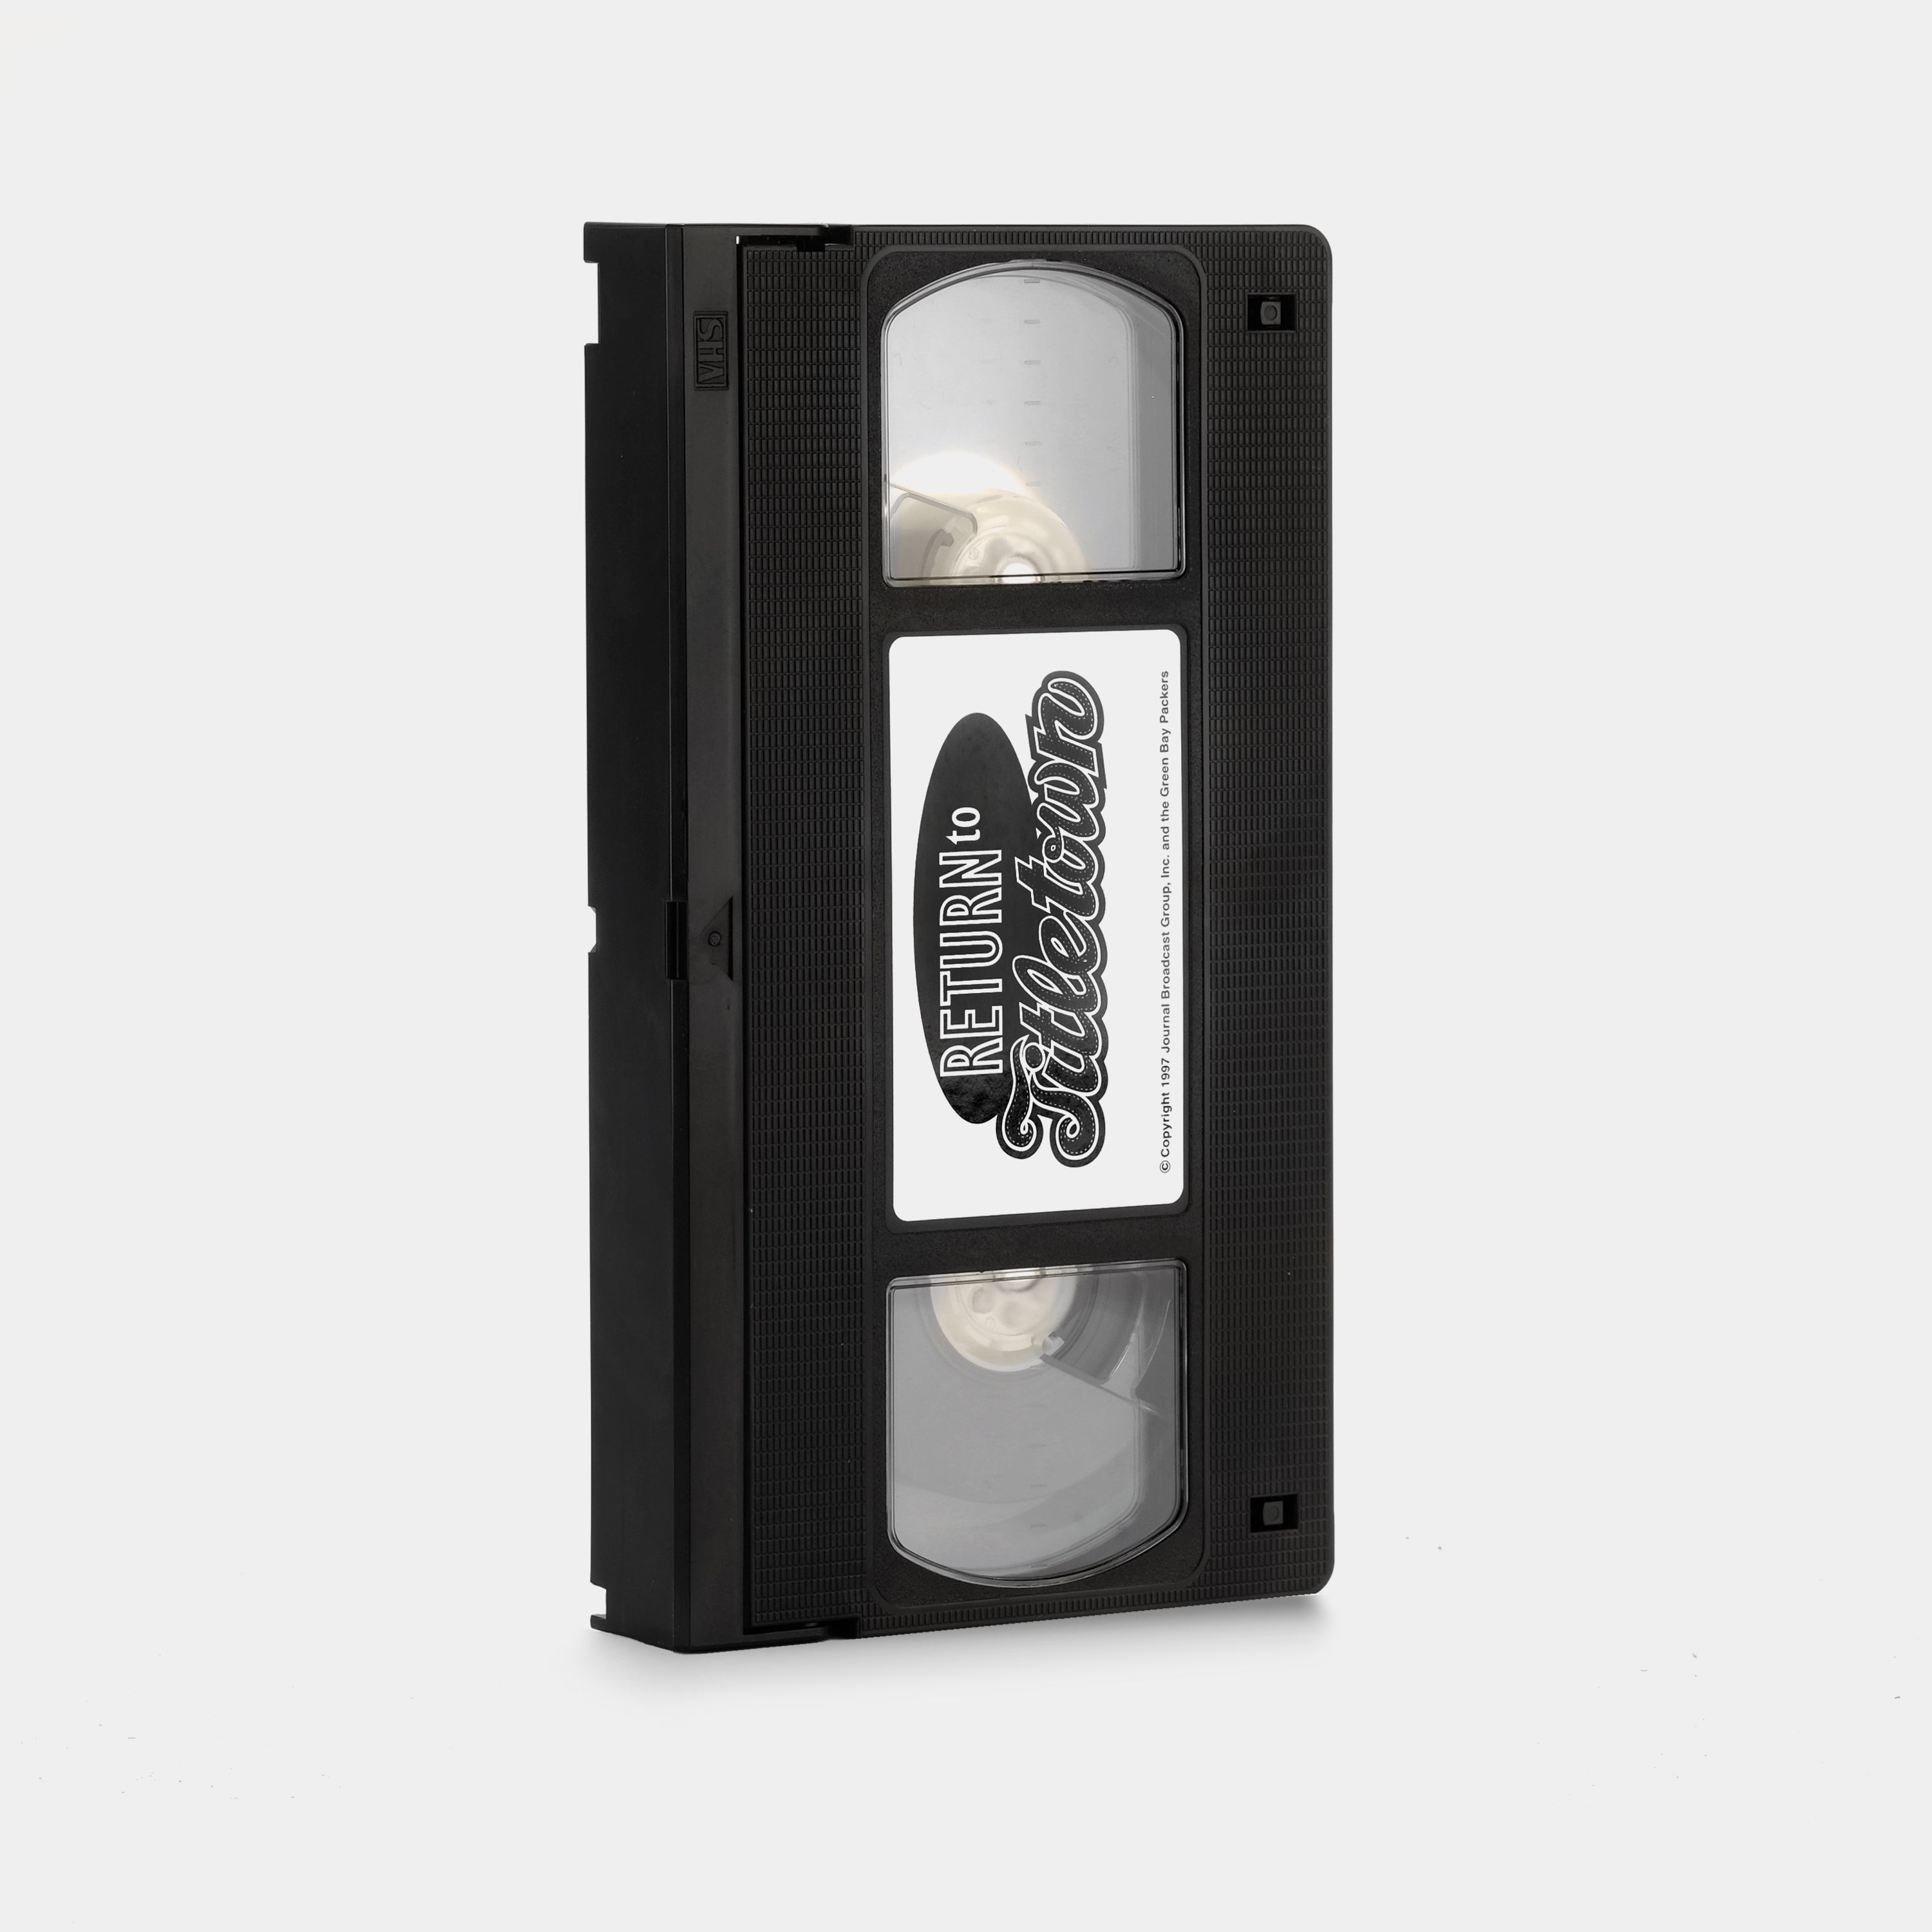 Green Bay Packers: Return To Titletown VHS Tape